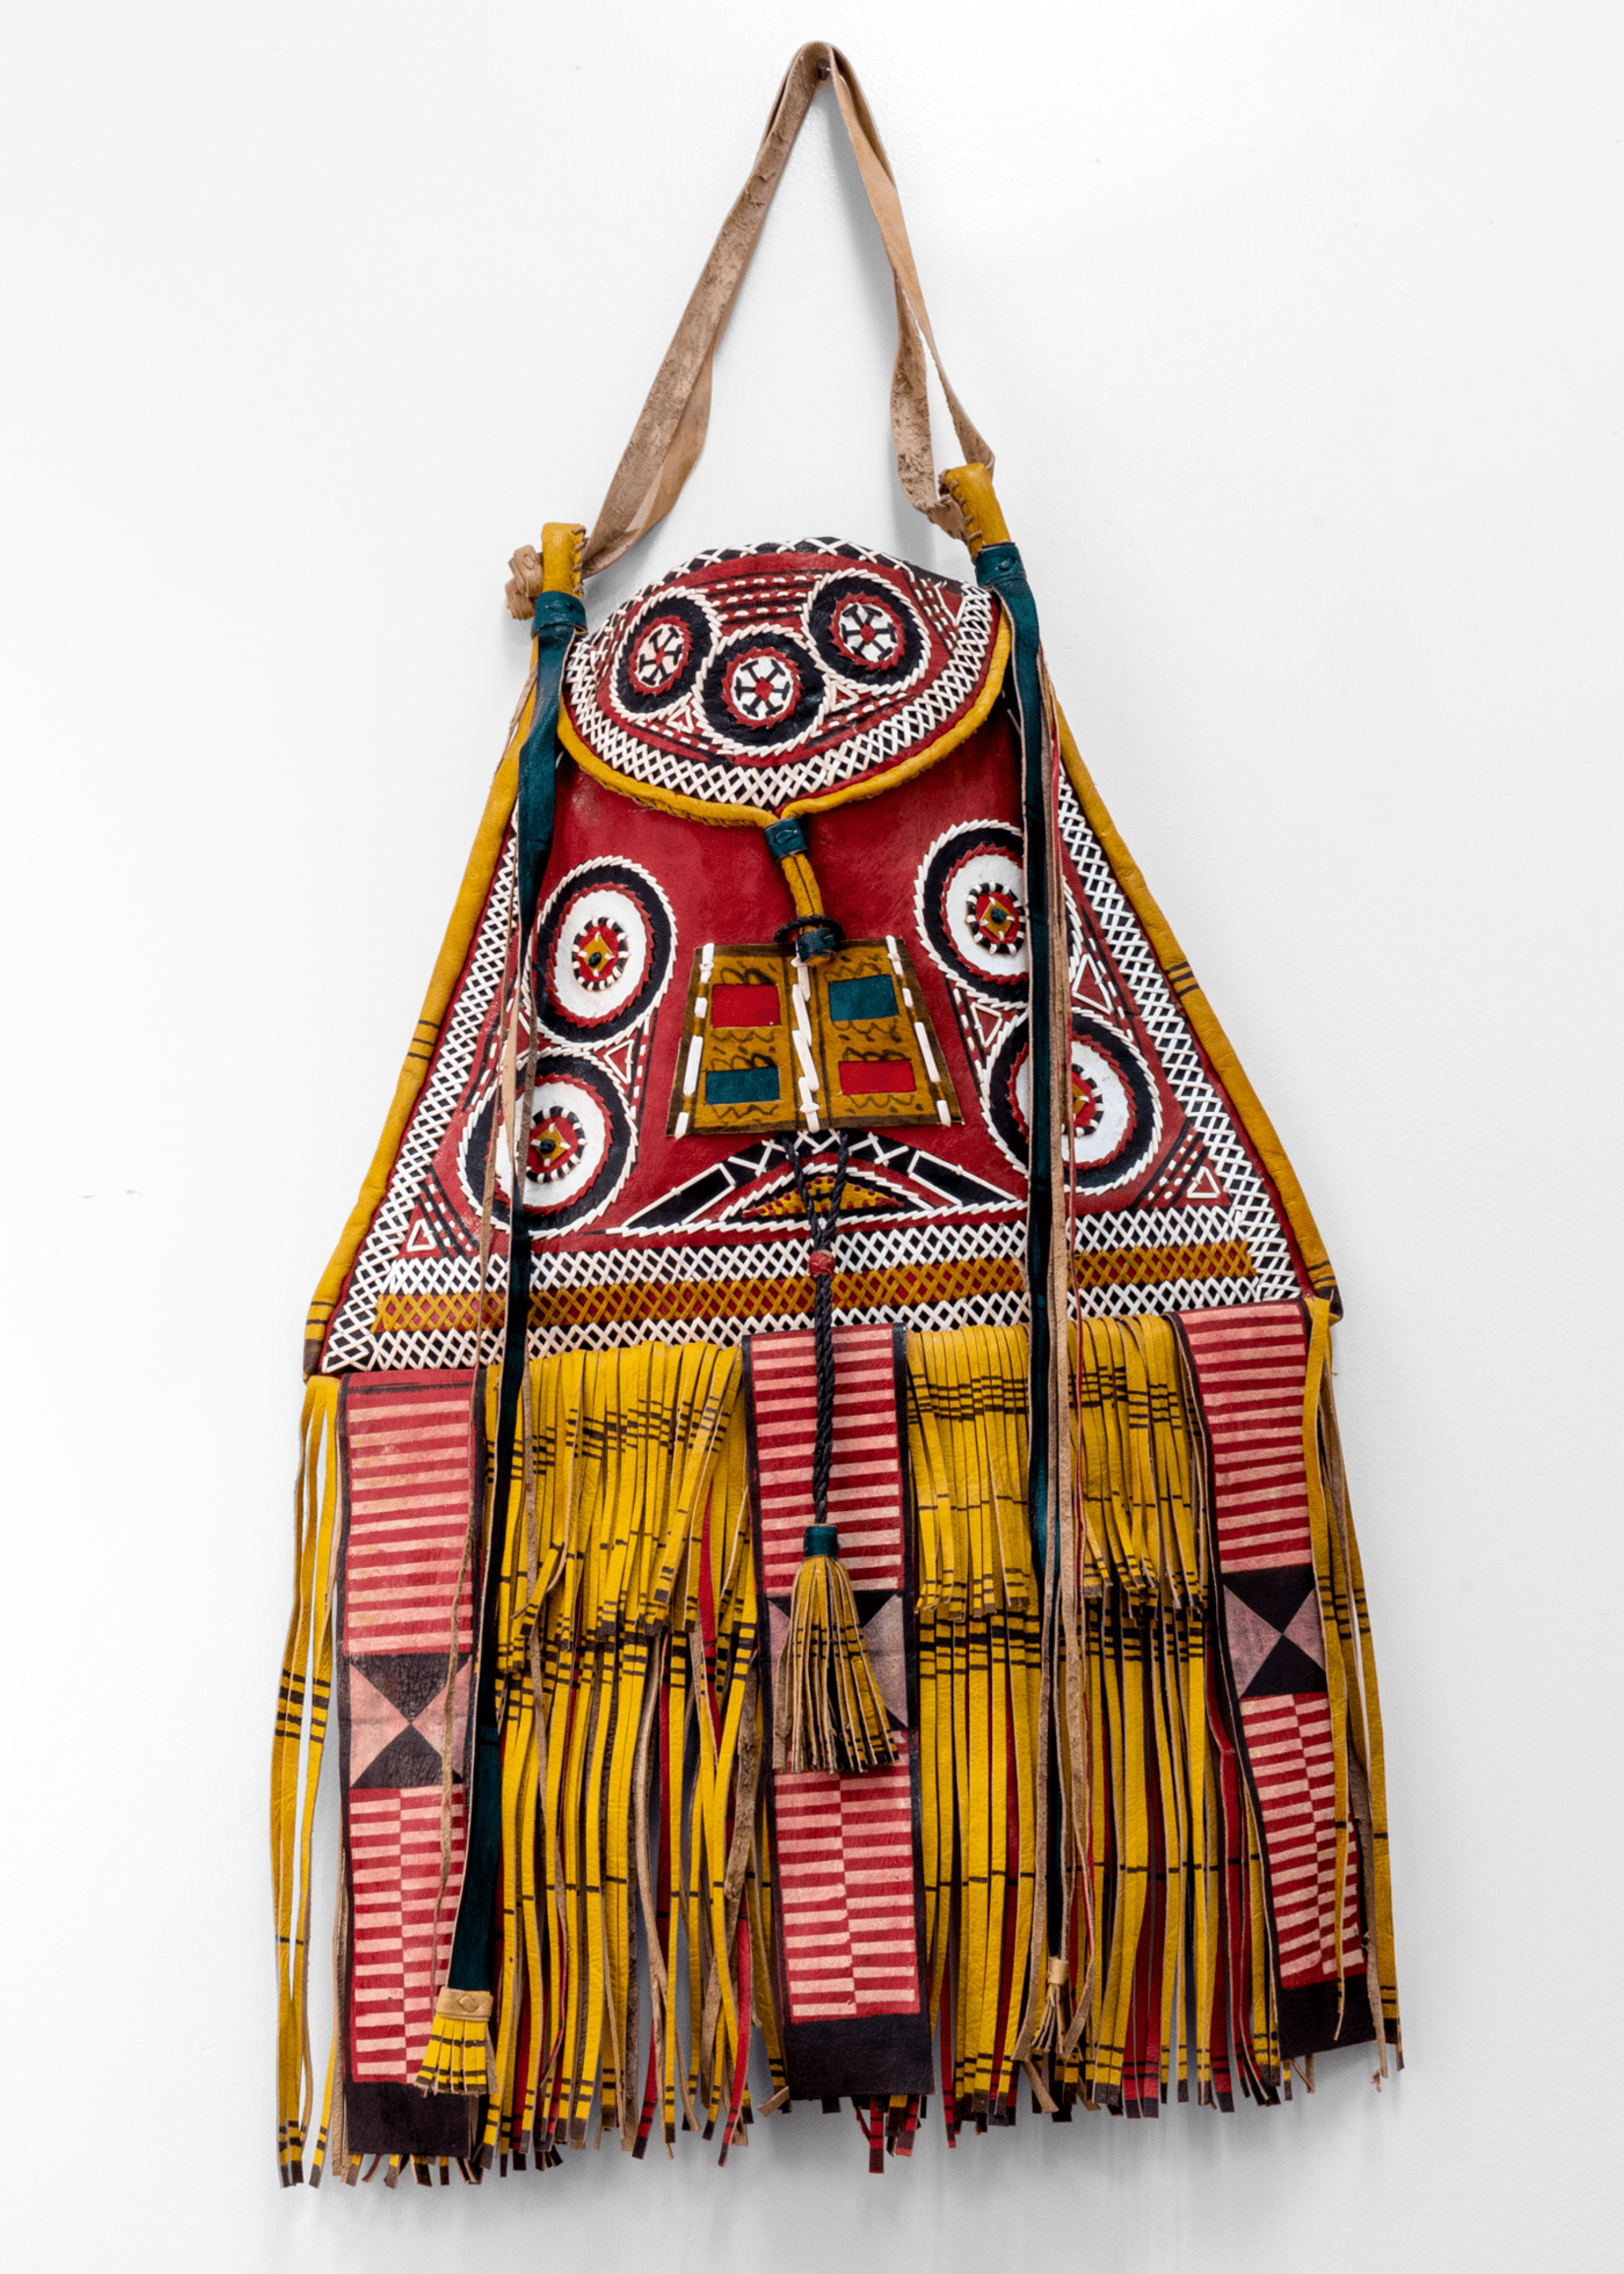 Mali Modern take on traditional Tuareg camel leather bag. Ornate and colorful hand-made  leather bag with fringes.